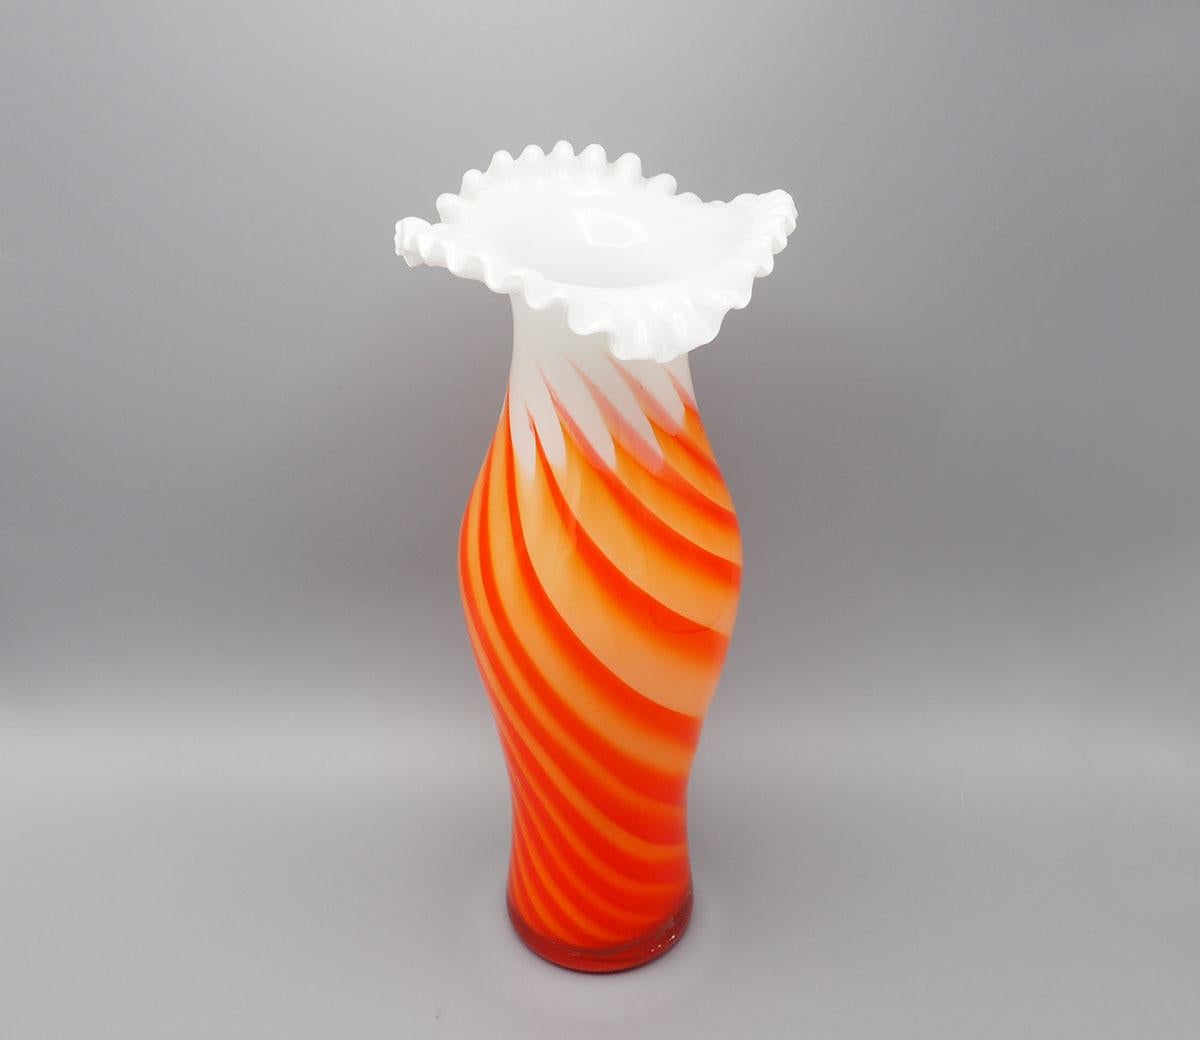 Beautifully handmade Vintage glass vase from the 60s/70s made by Opaline Florence Italy.

The vase is made of white glass and twisted orange glass.

The top flares out with a wavy edge.

Great eye-catcher in your interior, beautifully combined